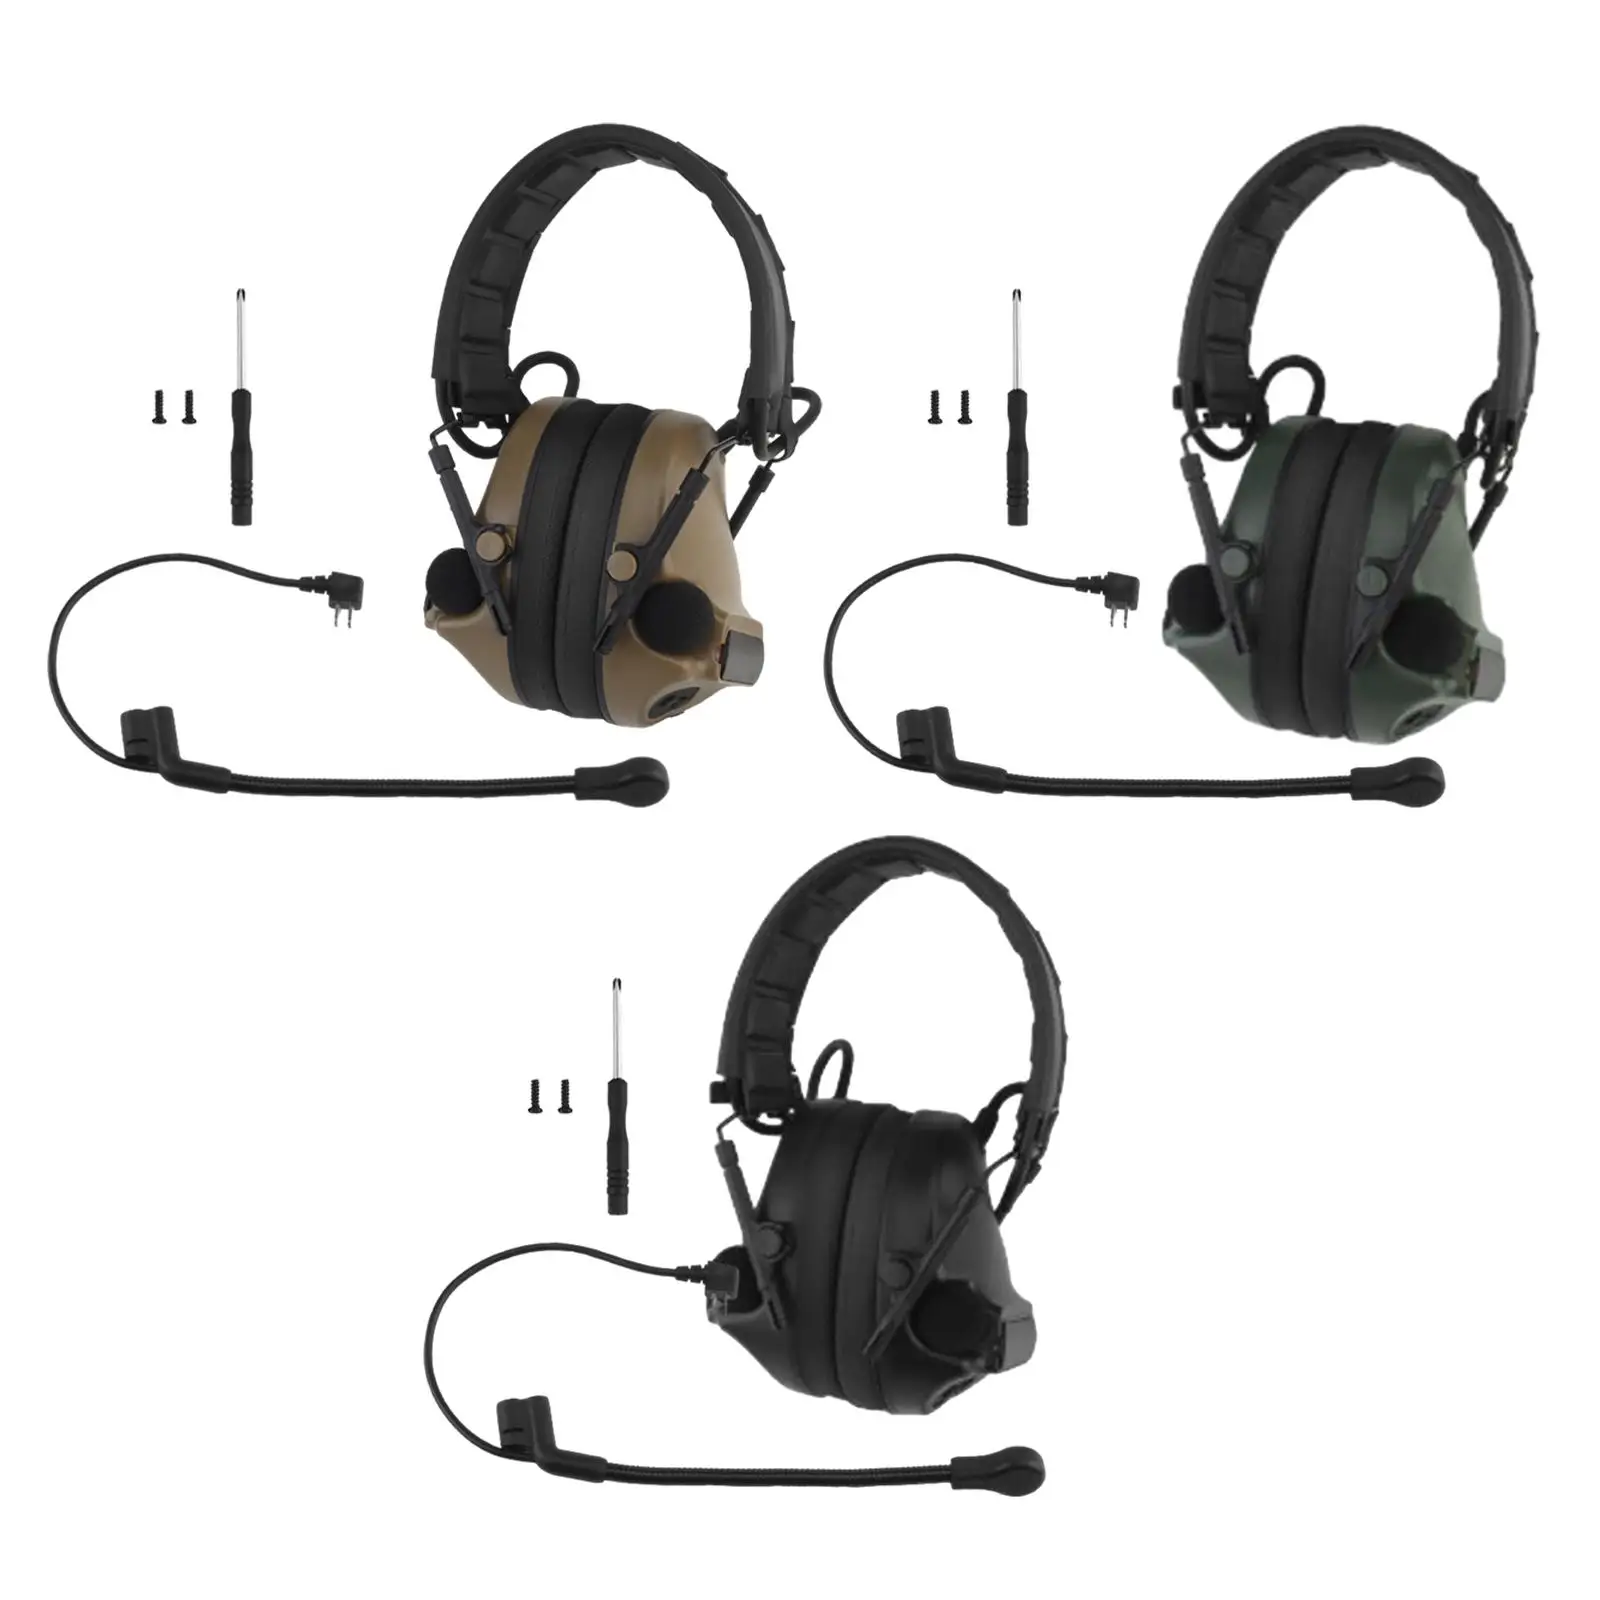 Hearing Protectors Ear Covers Earphones Compact Soundproof Earmuffs Ear Cups for Manufacturing Business Sleeping Travel Learning